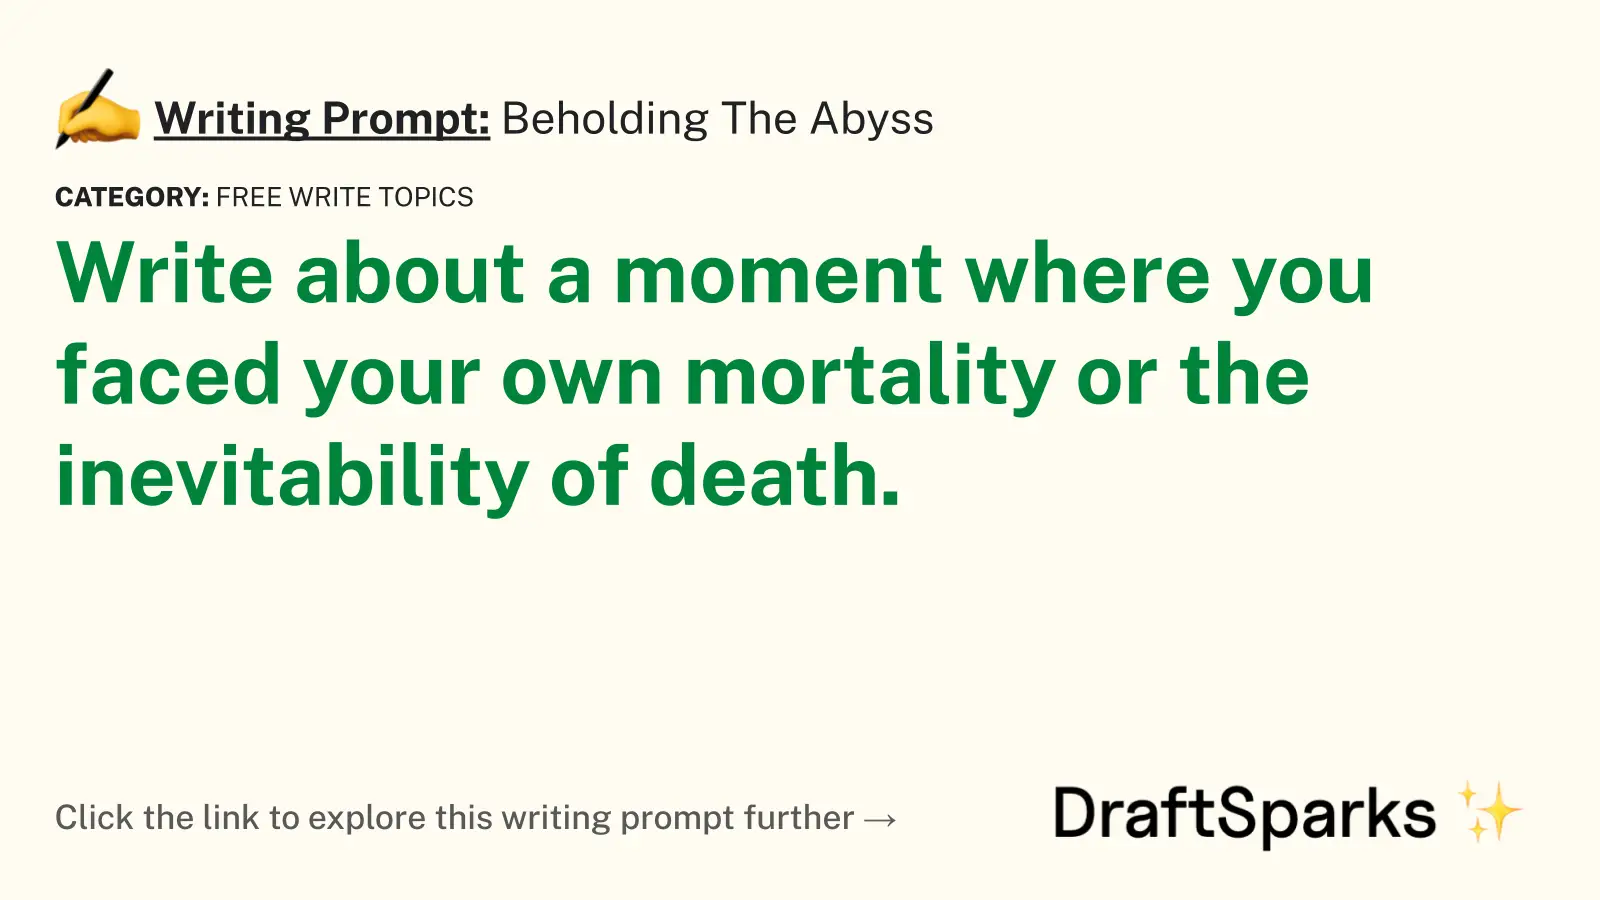 Beholding The Abyss